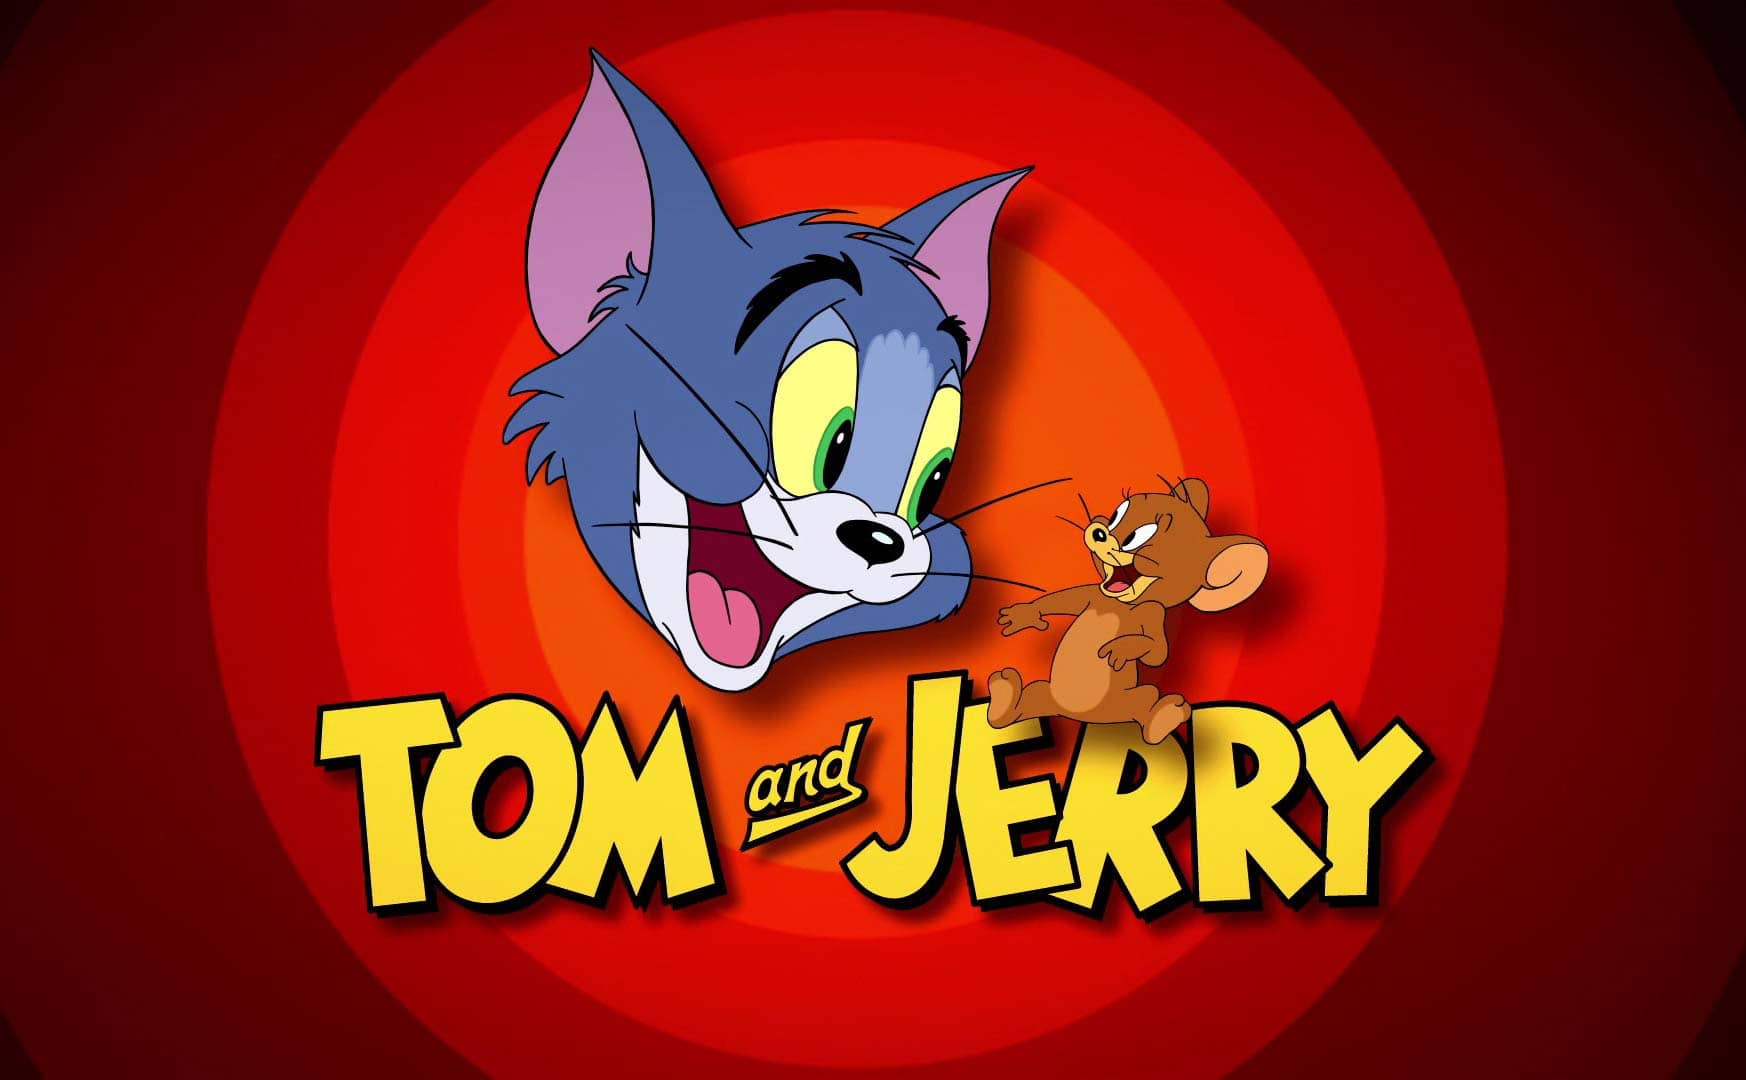 my favorite cartoon character tom and jerry